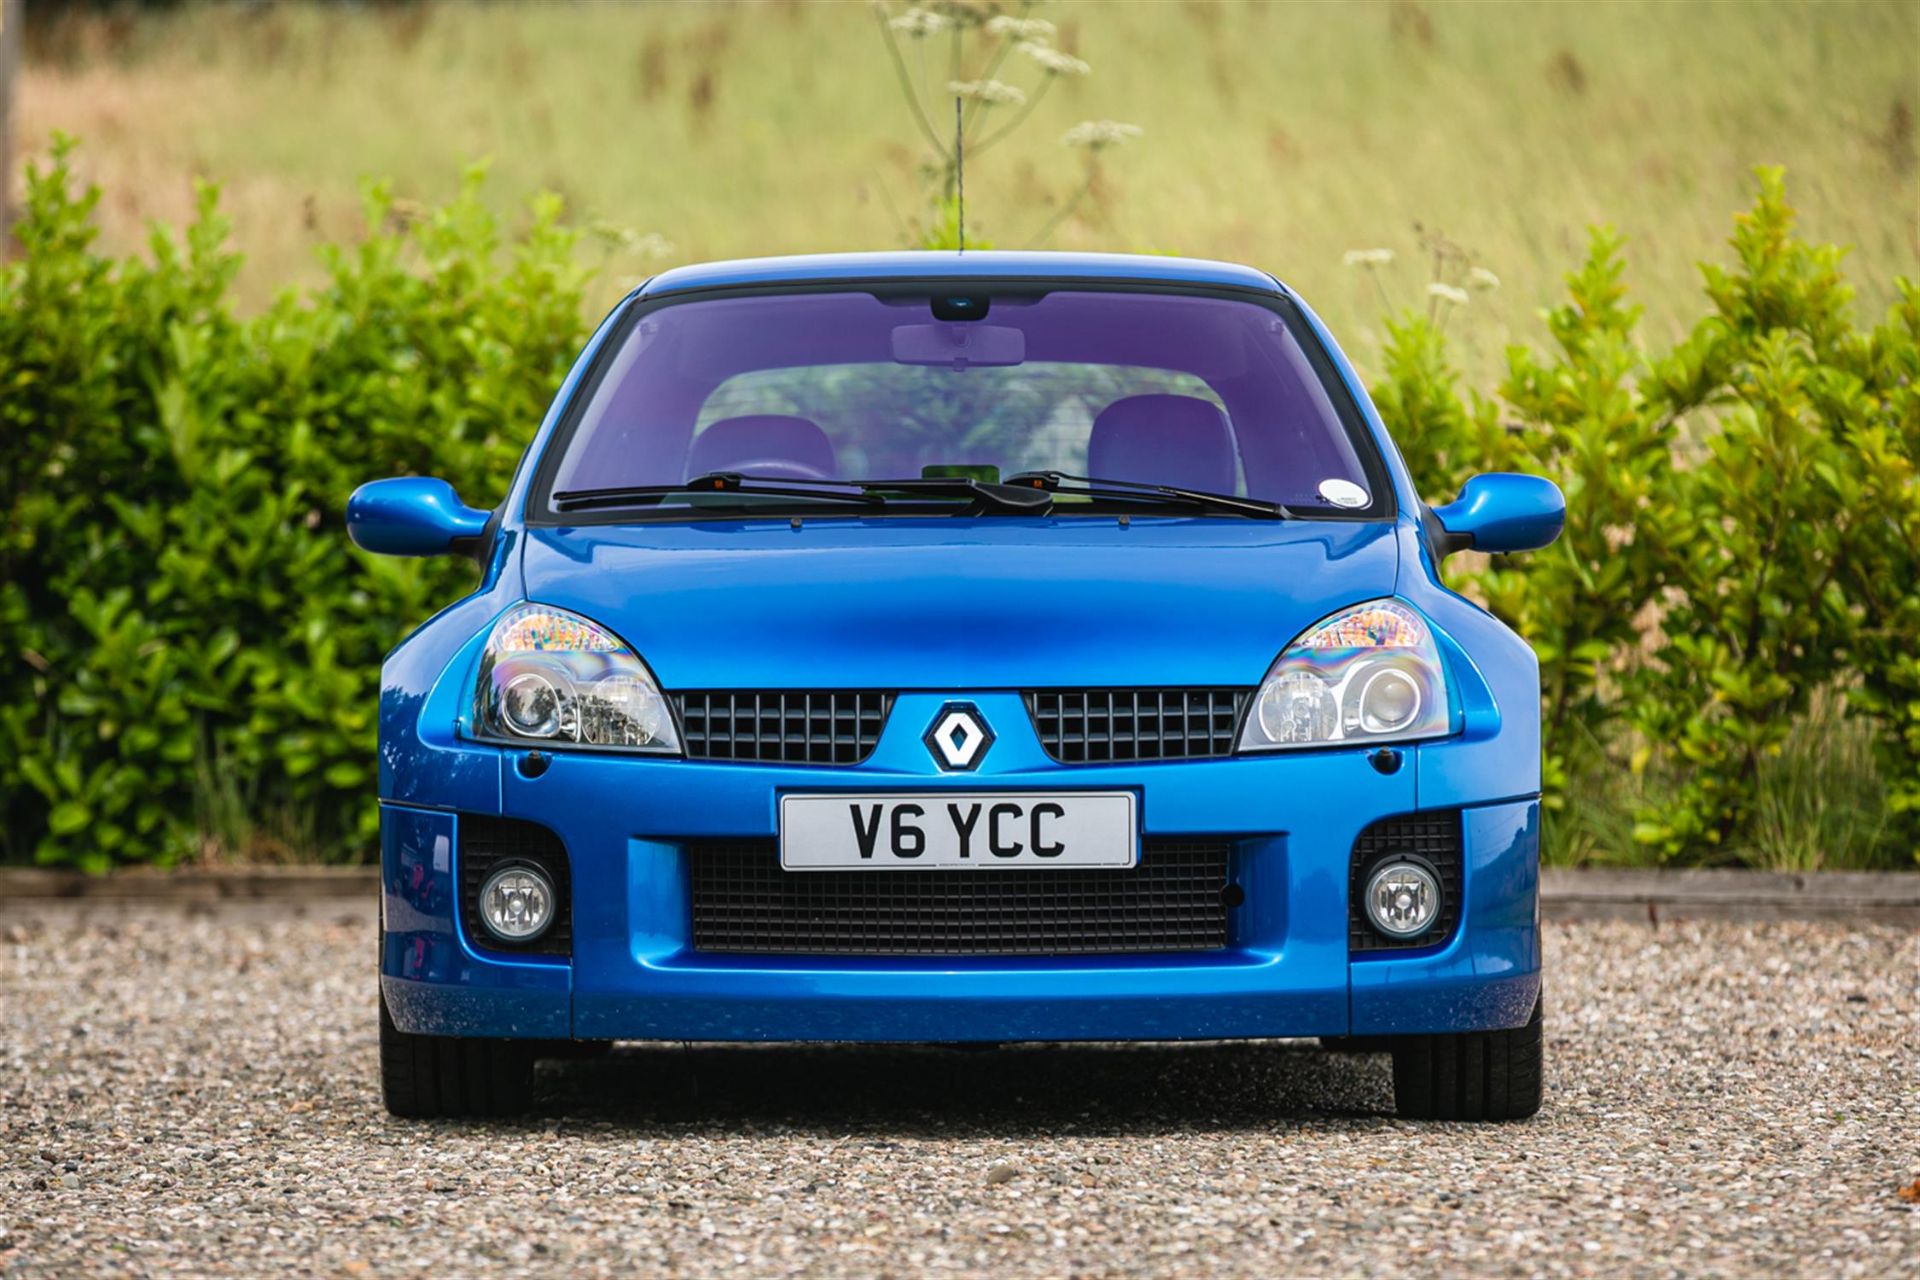 2003 Renault Clio V6 RenaultSport (255) Phase 2 - Image 6 of 10